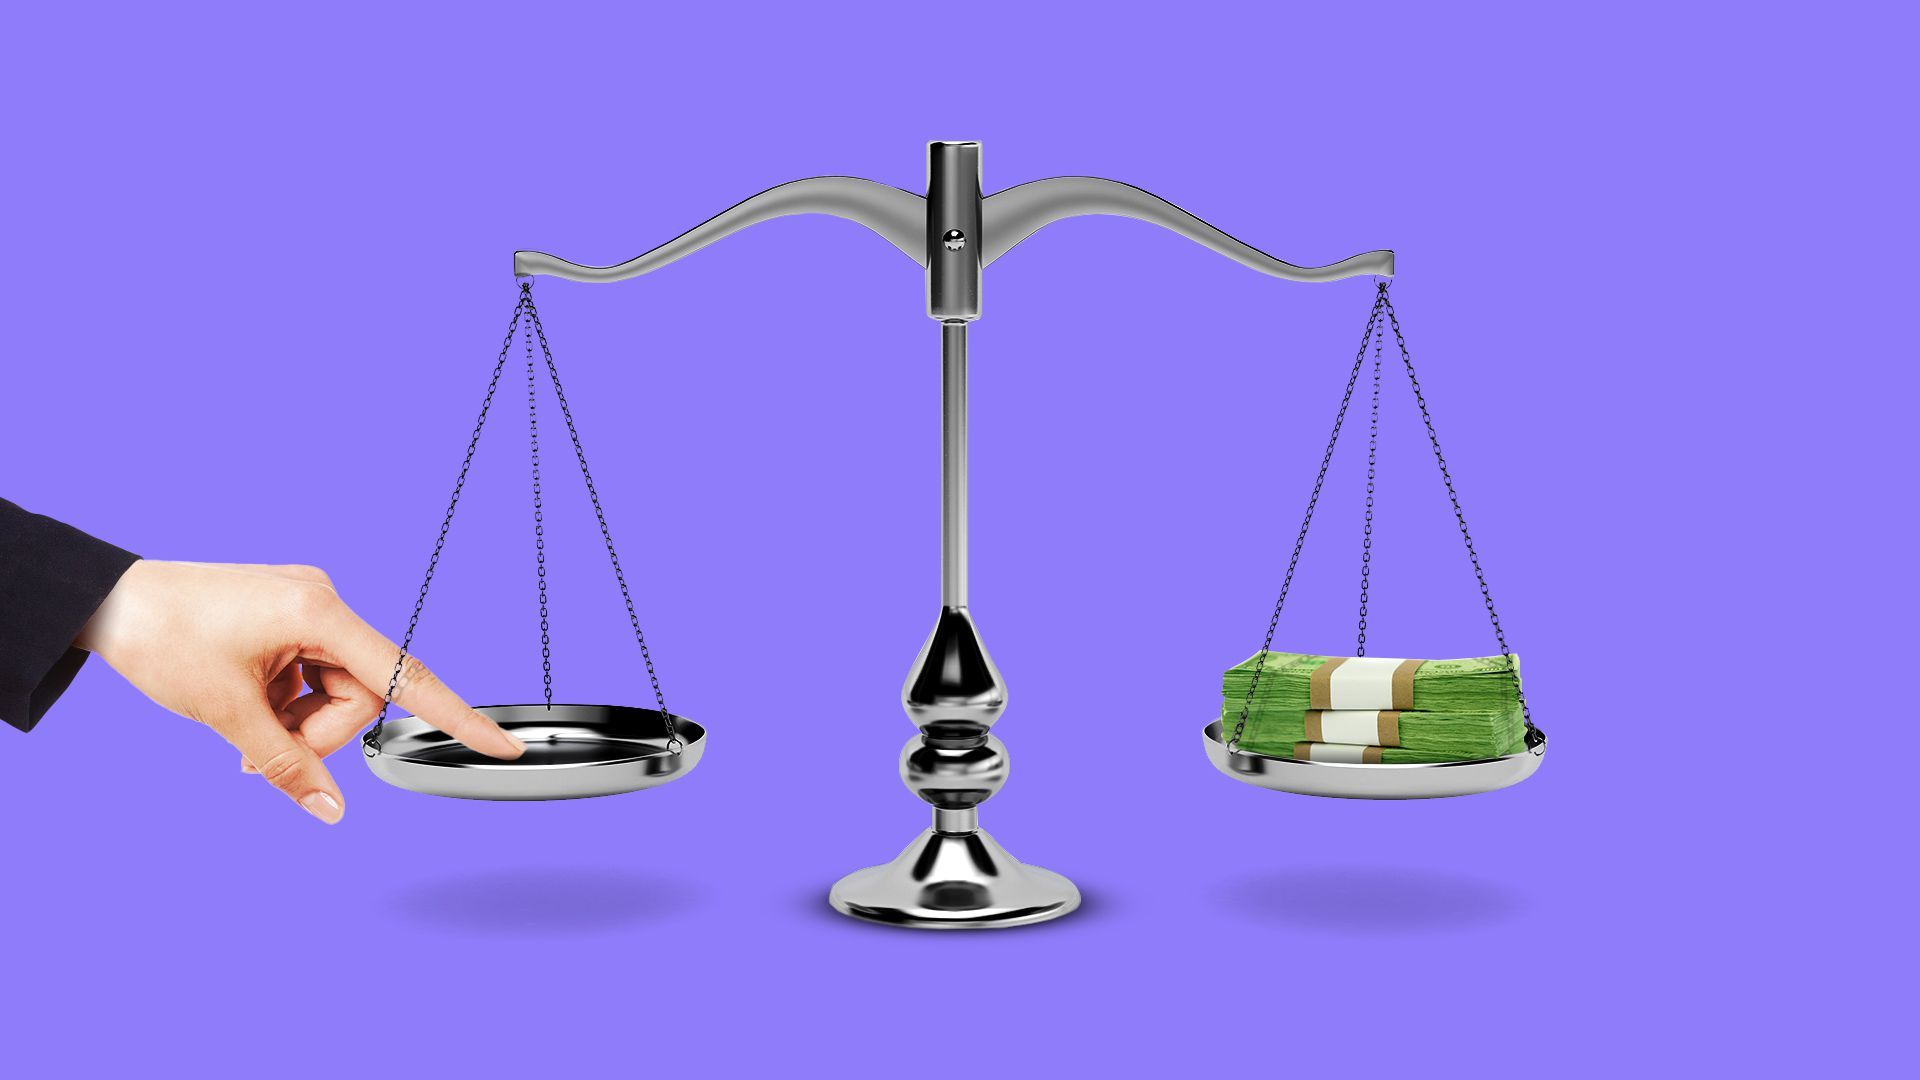 Illustration of a hand equalizing a scale with money on the opposite side.   